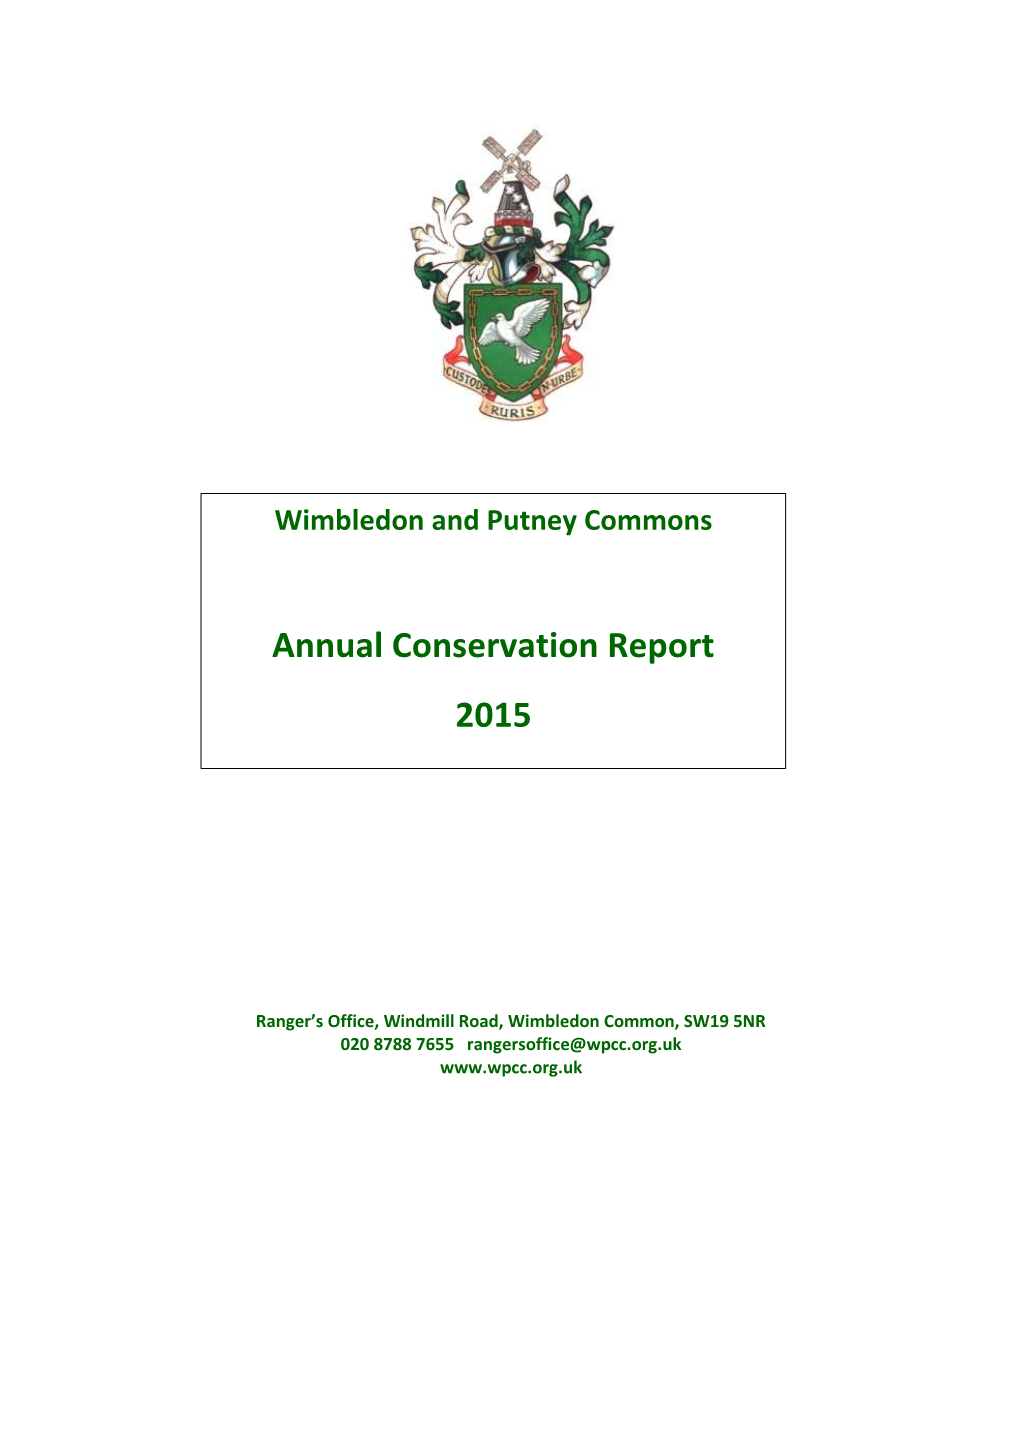 Annual Conservation Report 2015